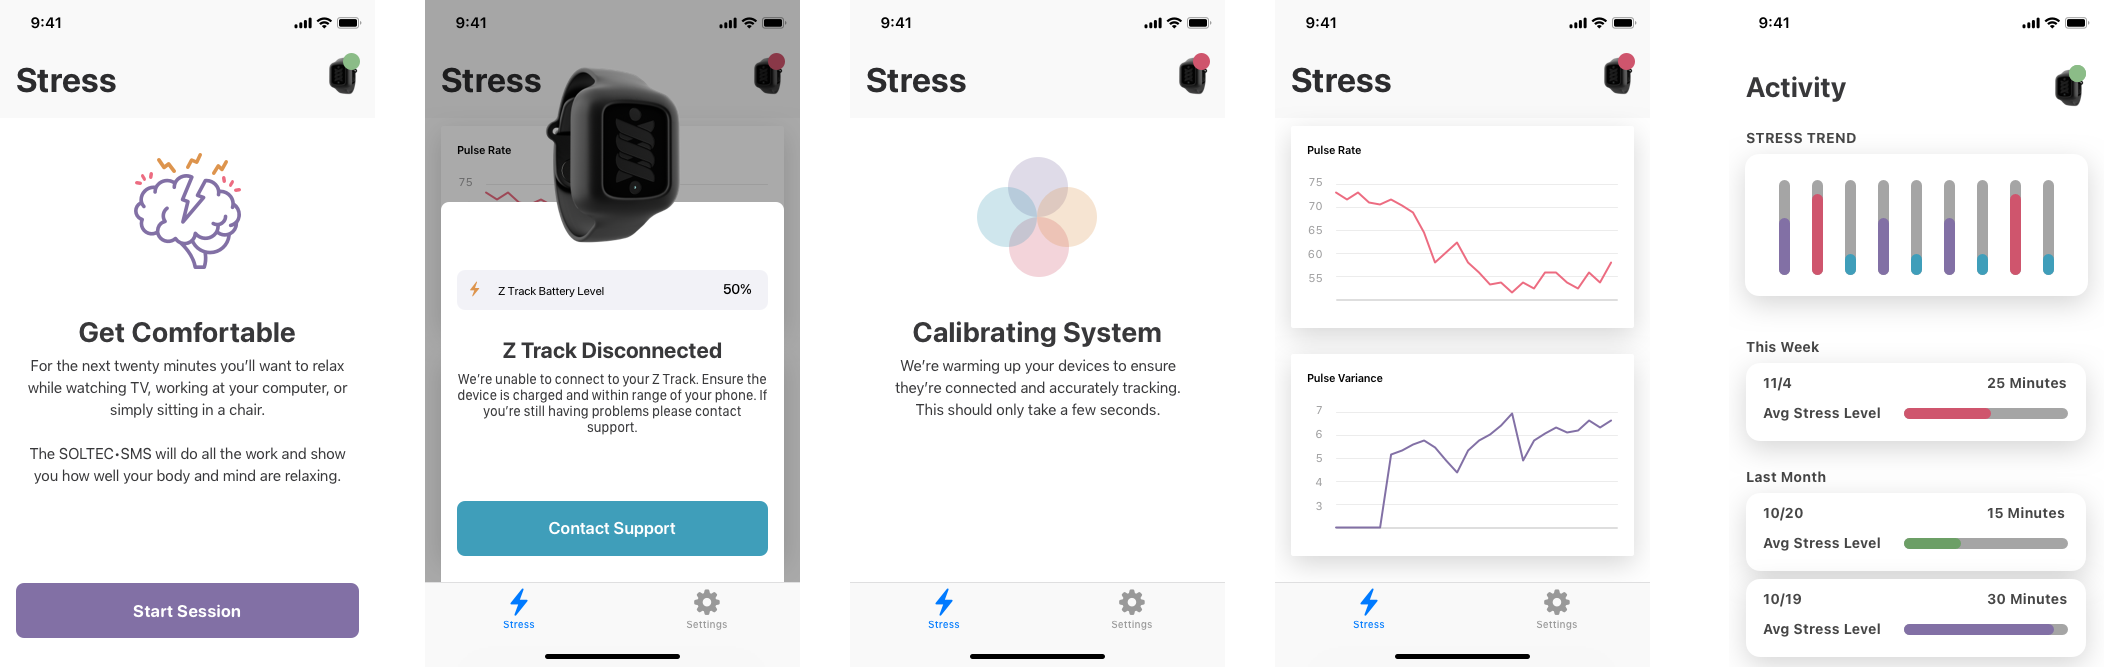 Stress Session App Overview